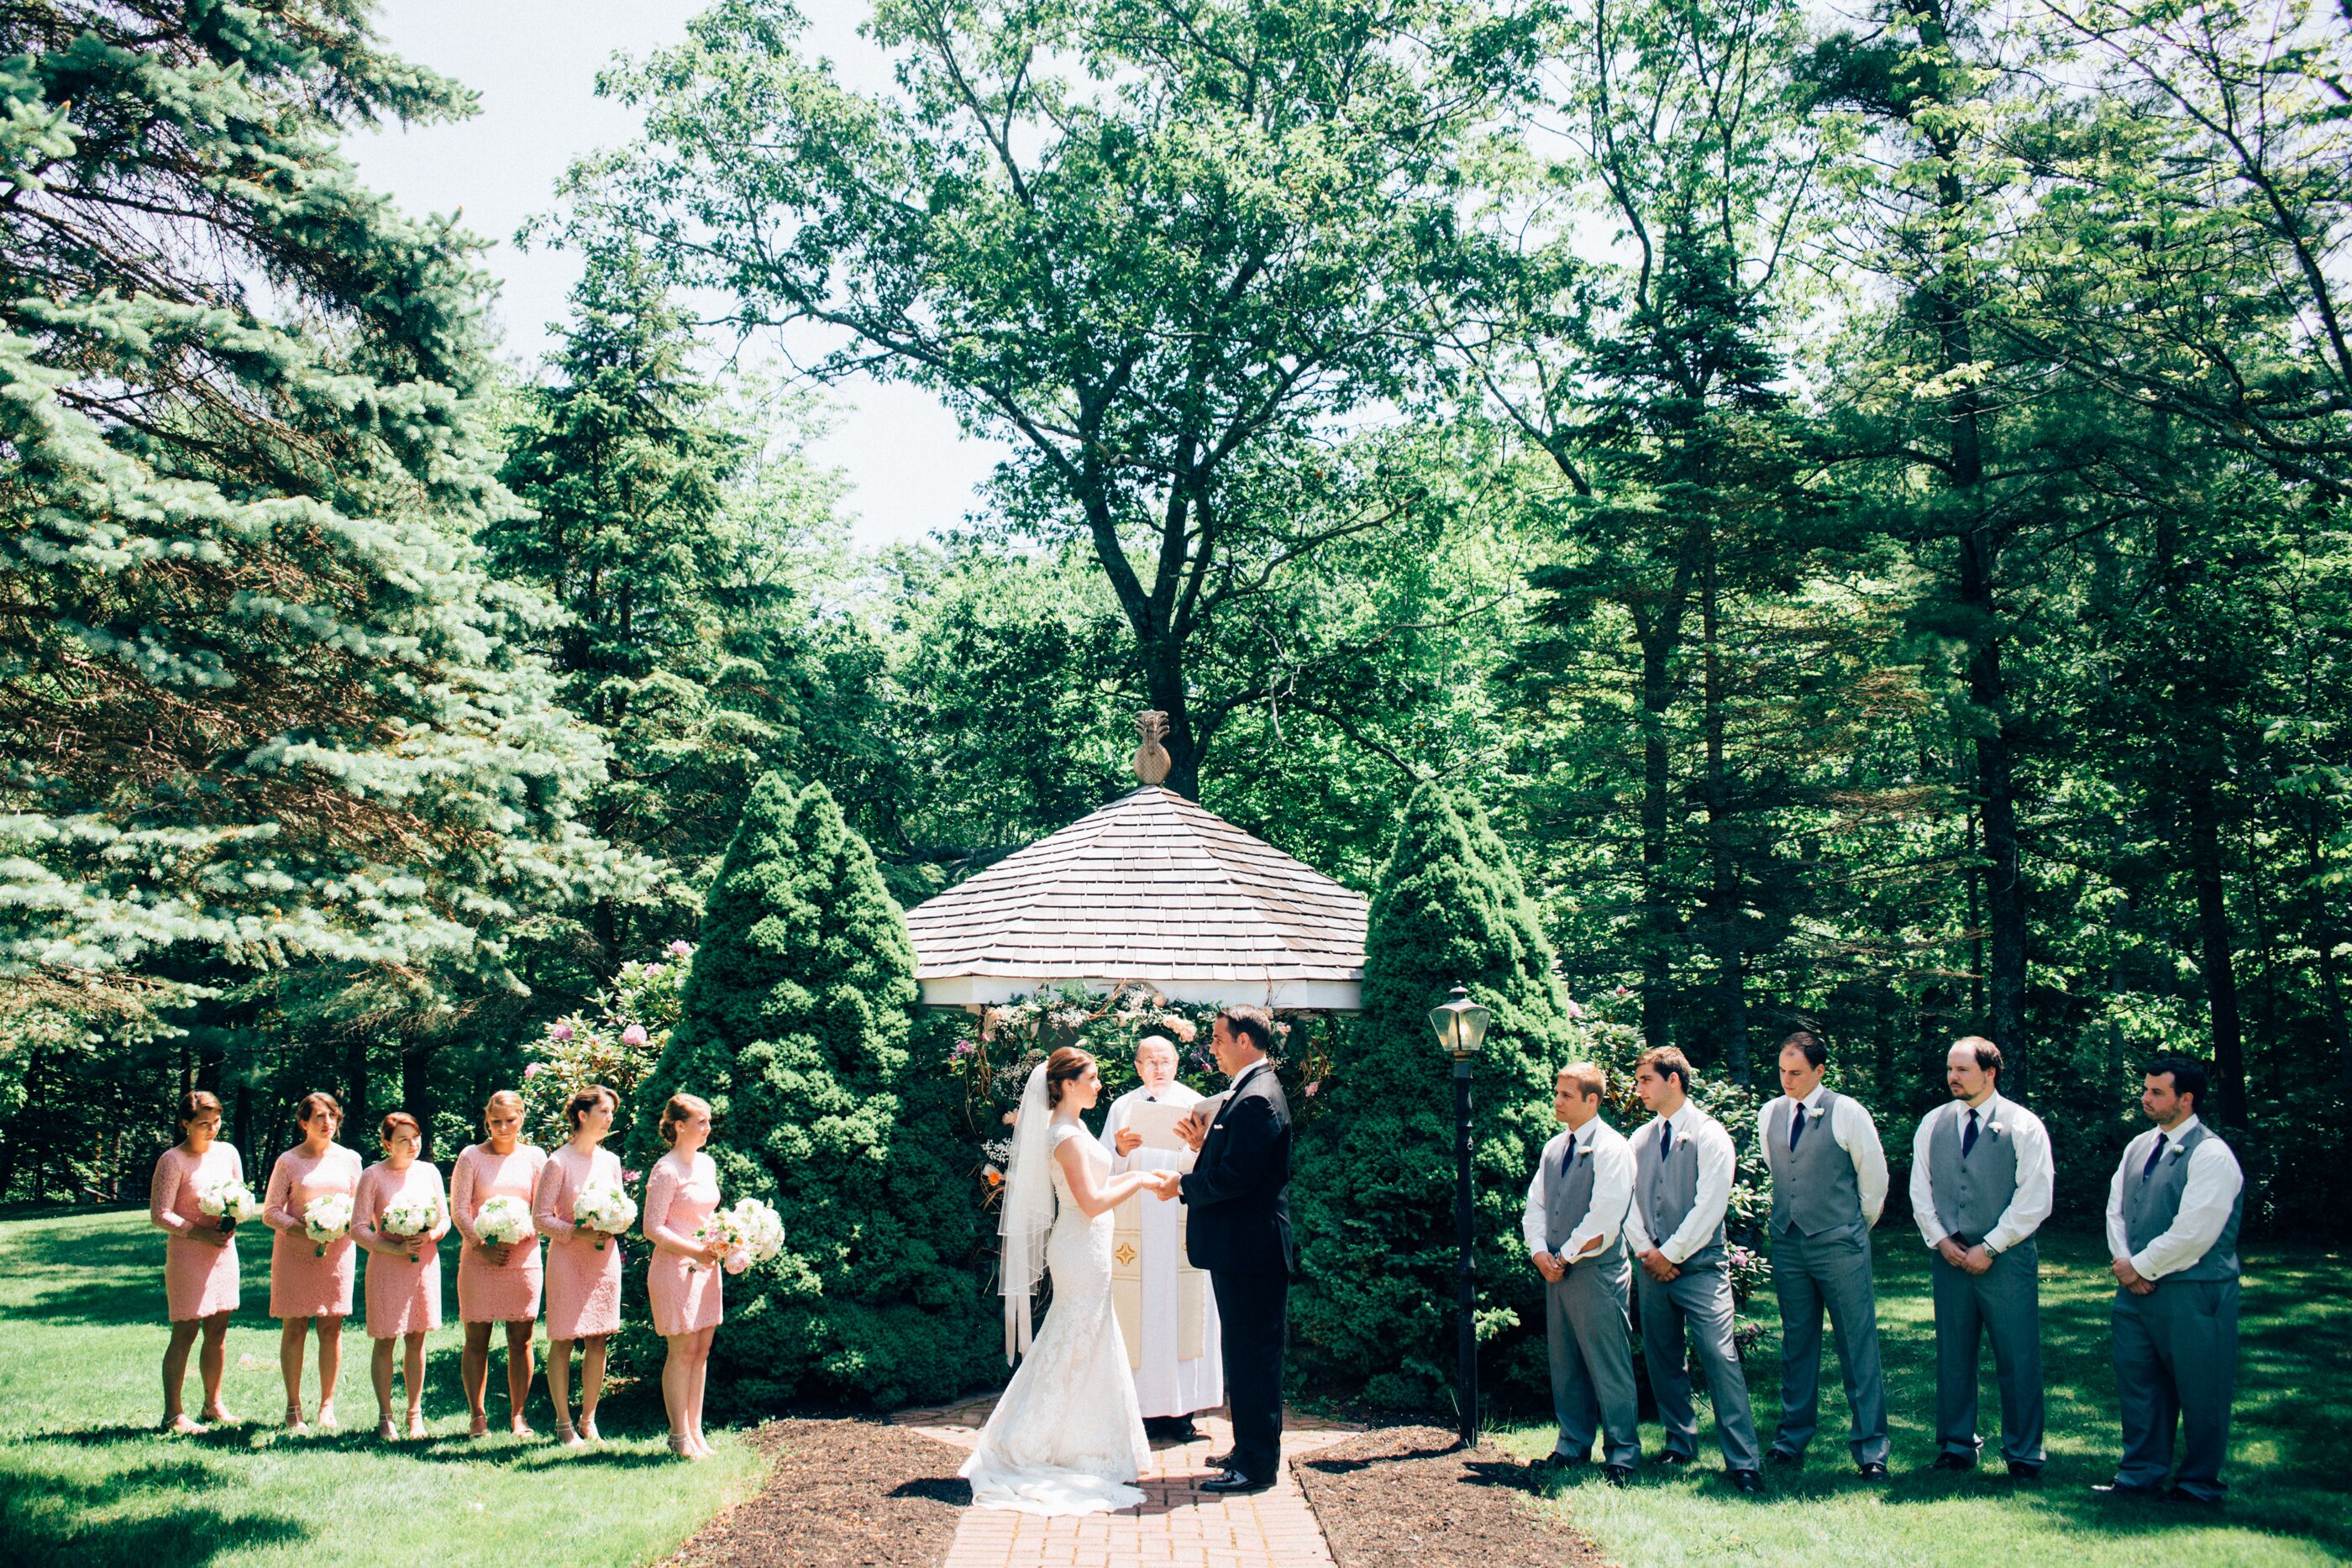 Intimate Garden Ceremony At Clay Hill Farm